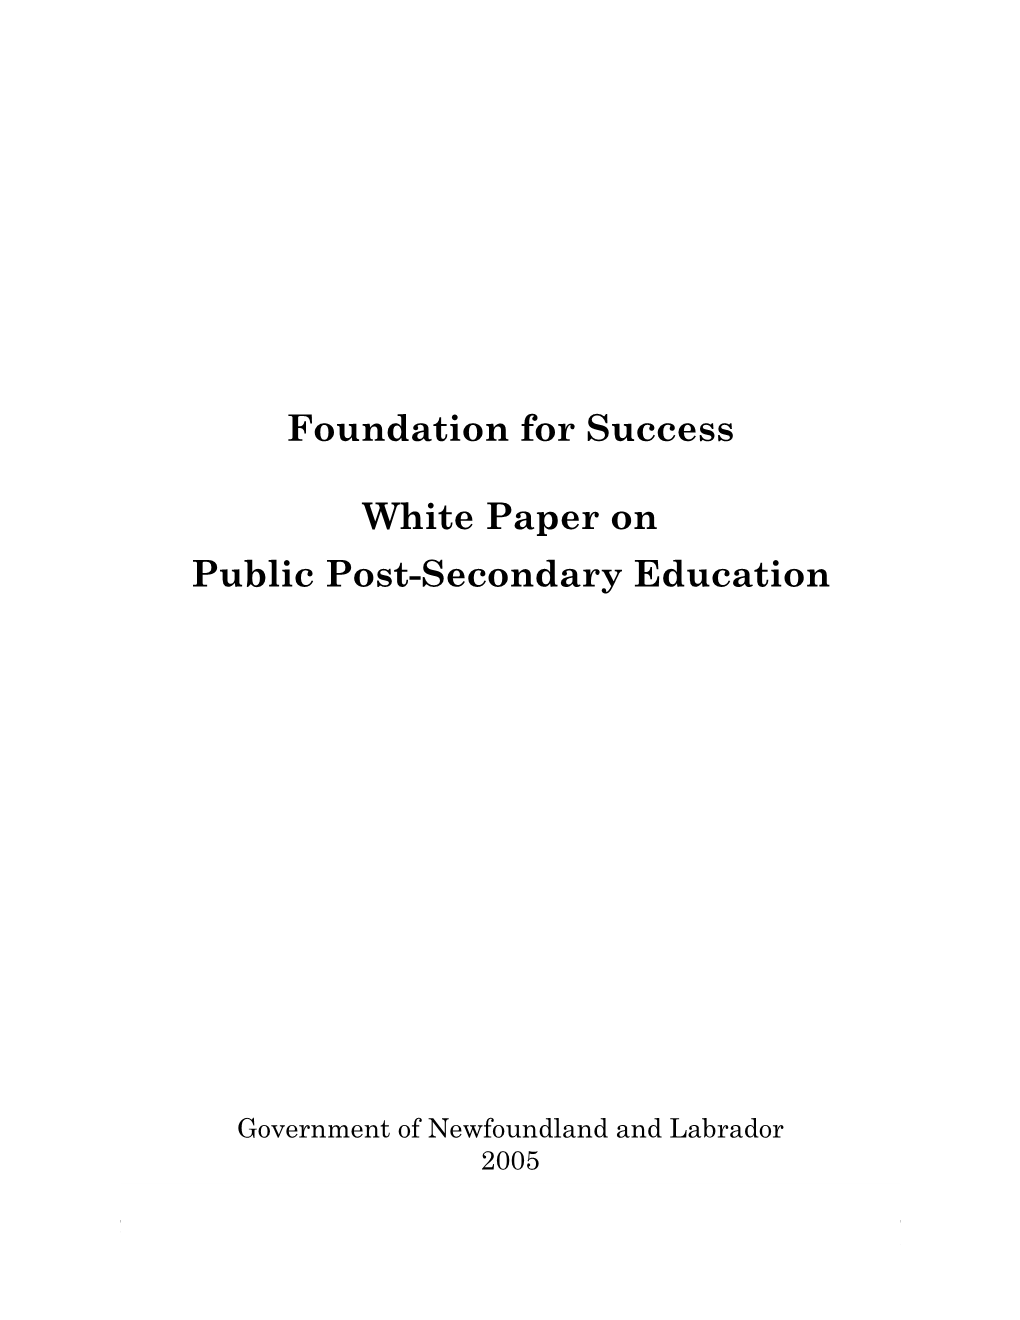 Foundation for Success White Paper on Public Post-Secondary Education